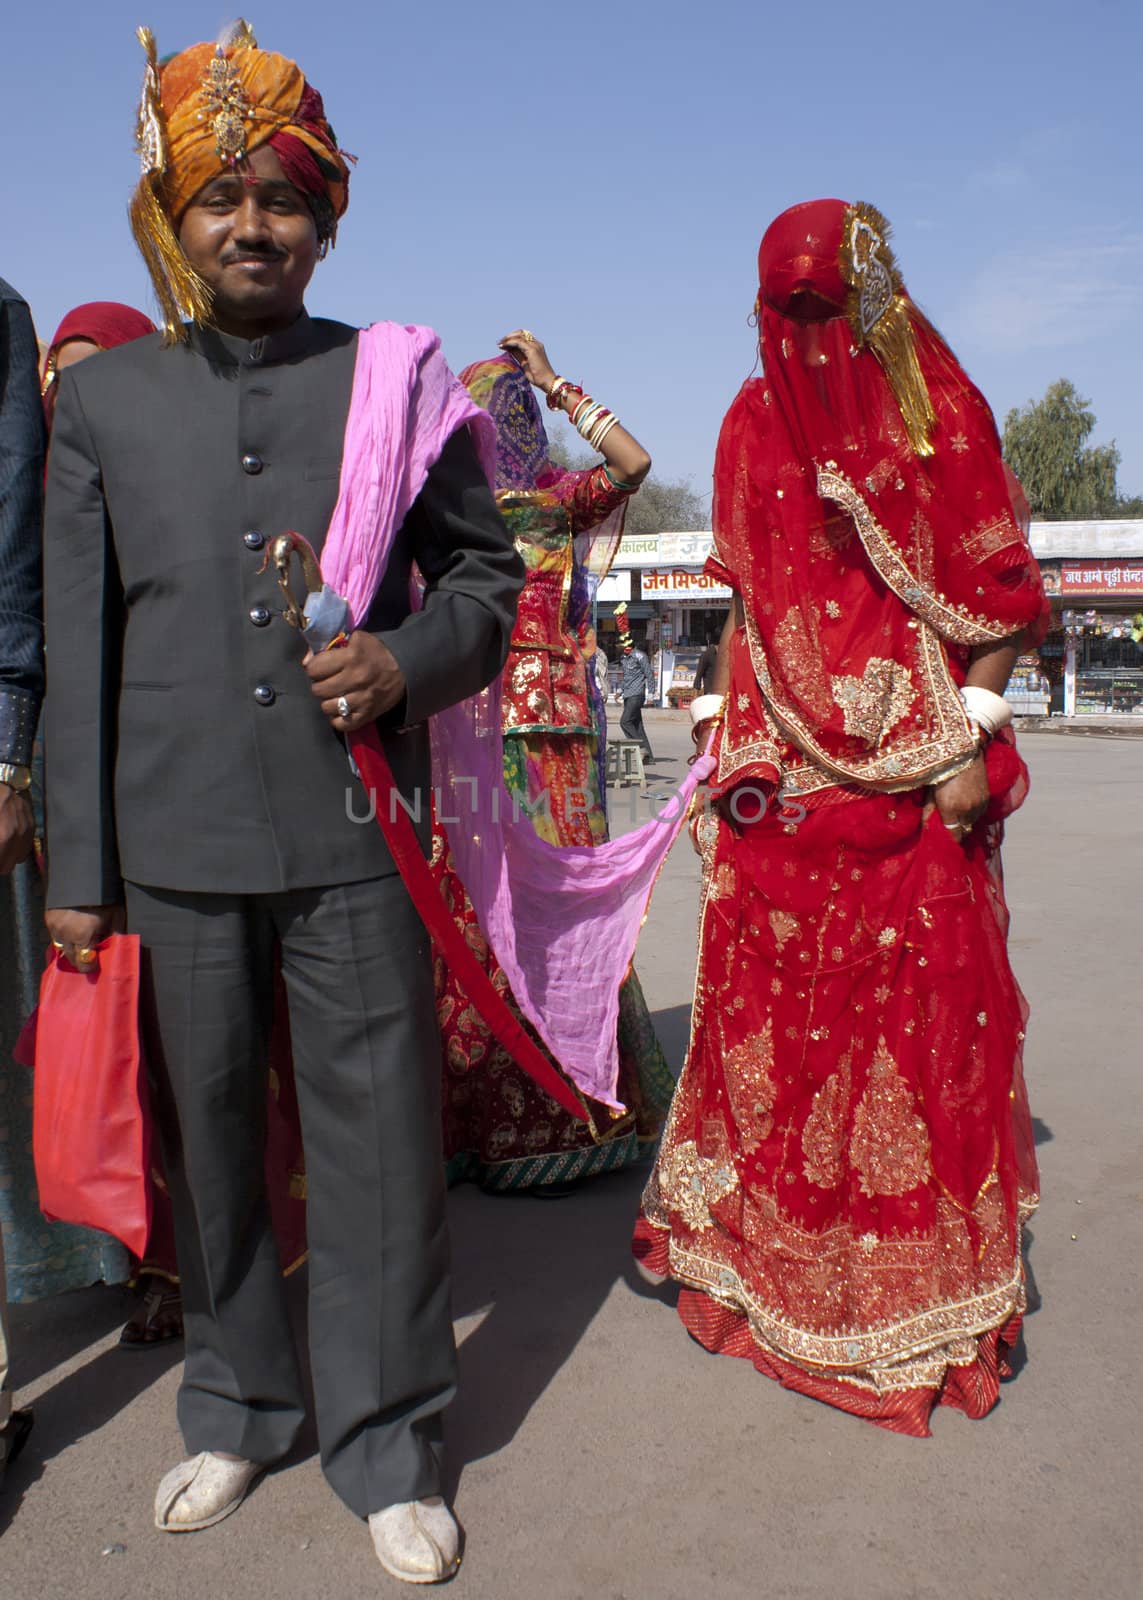 A young fancy dressed boy-man, with a moustache, pulls a totally covered and colorful veiled young woman on a pink leash behind him, while other women and men sing and clap their hands. With his orange-golden turban, overly decorated with precious stones, and his Mao-style dark grey suit closed up to his chin, over white shoes, he radiates triumph and smiles happiness for all to see.